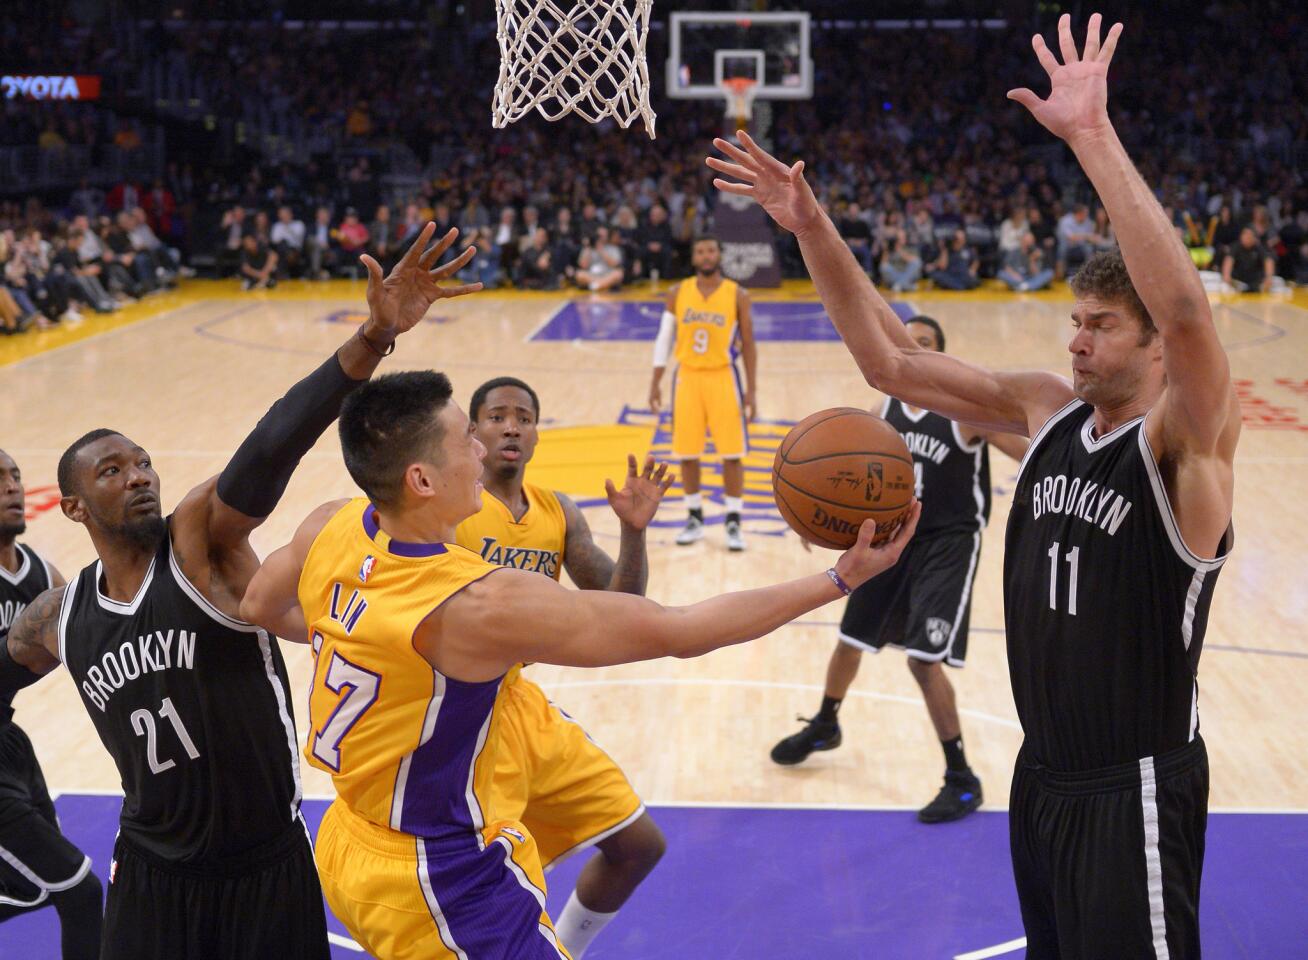 Lakers point guard Jeremy Lin attempts a reverse layup against the Nets' Cory Jefferson (21) and Brook Lopez (11) at Staples Center.